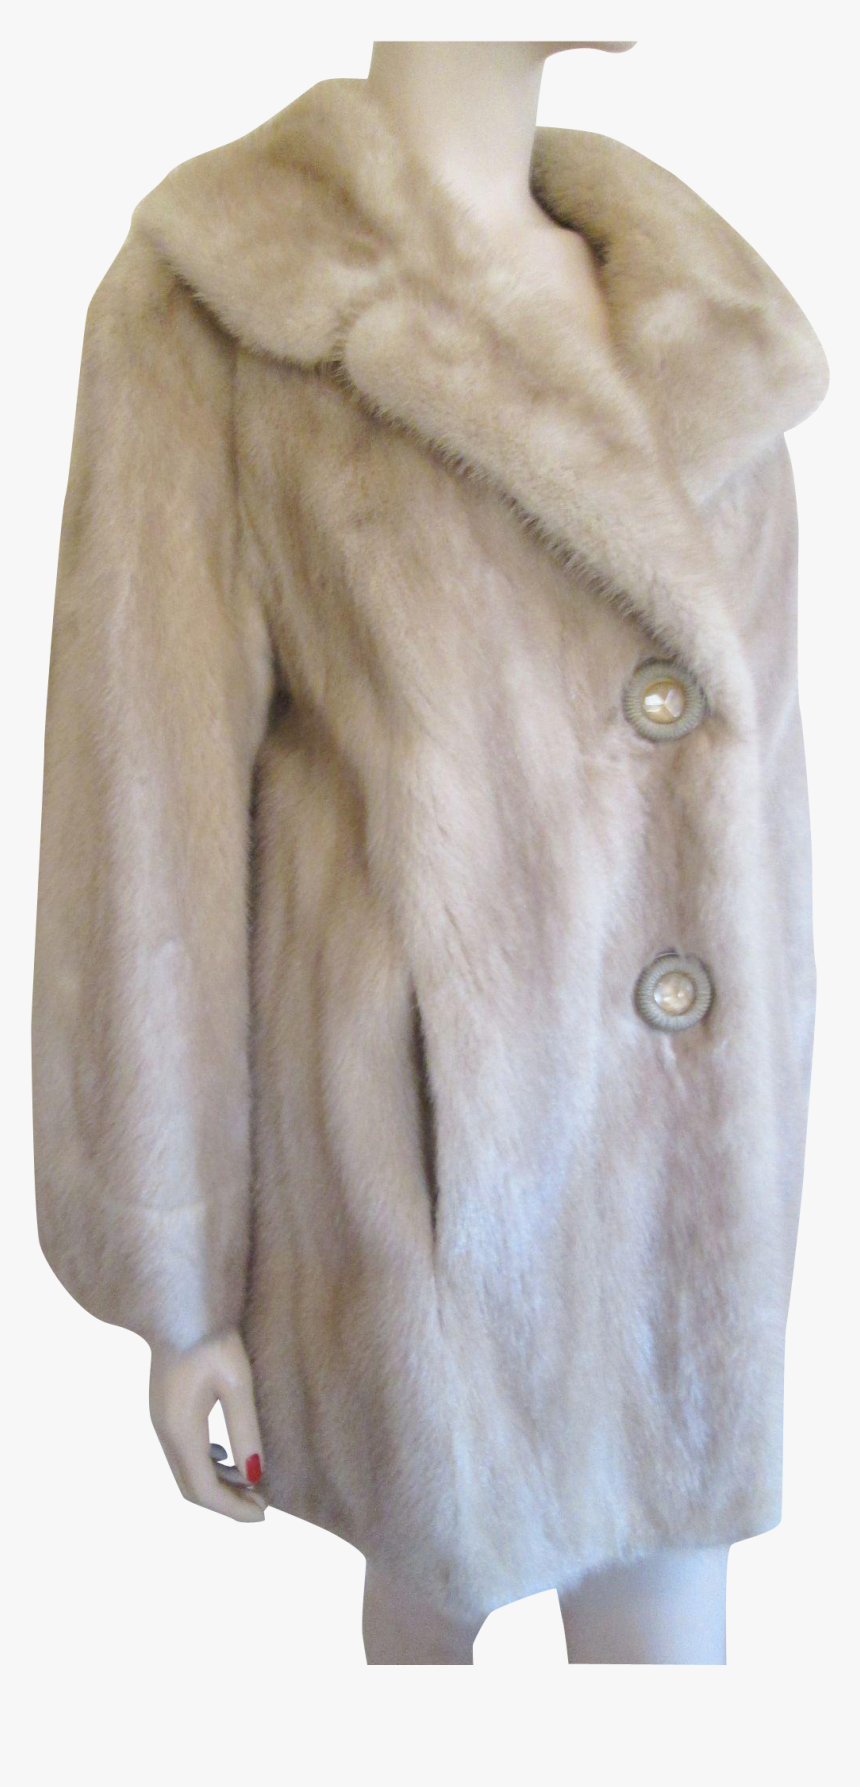 White Fur Coat Png Image - Fur Coat With Buttons, Transparent Png, Free Download